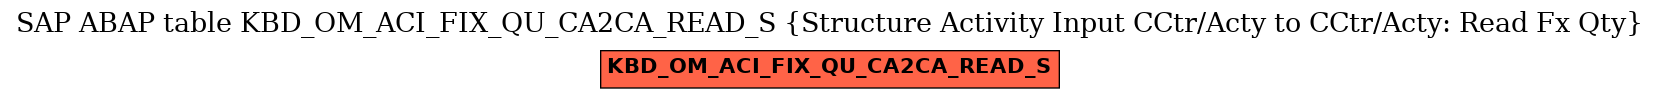 E-R Diagram for table KBD_OM_ACI_FIX_QU_CA2CA_READ_S (Structure Activity Input CCtr/Acty to CCtr/Acty: Read Fx Qty)